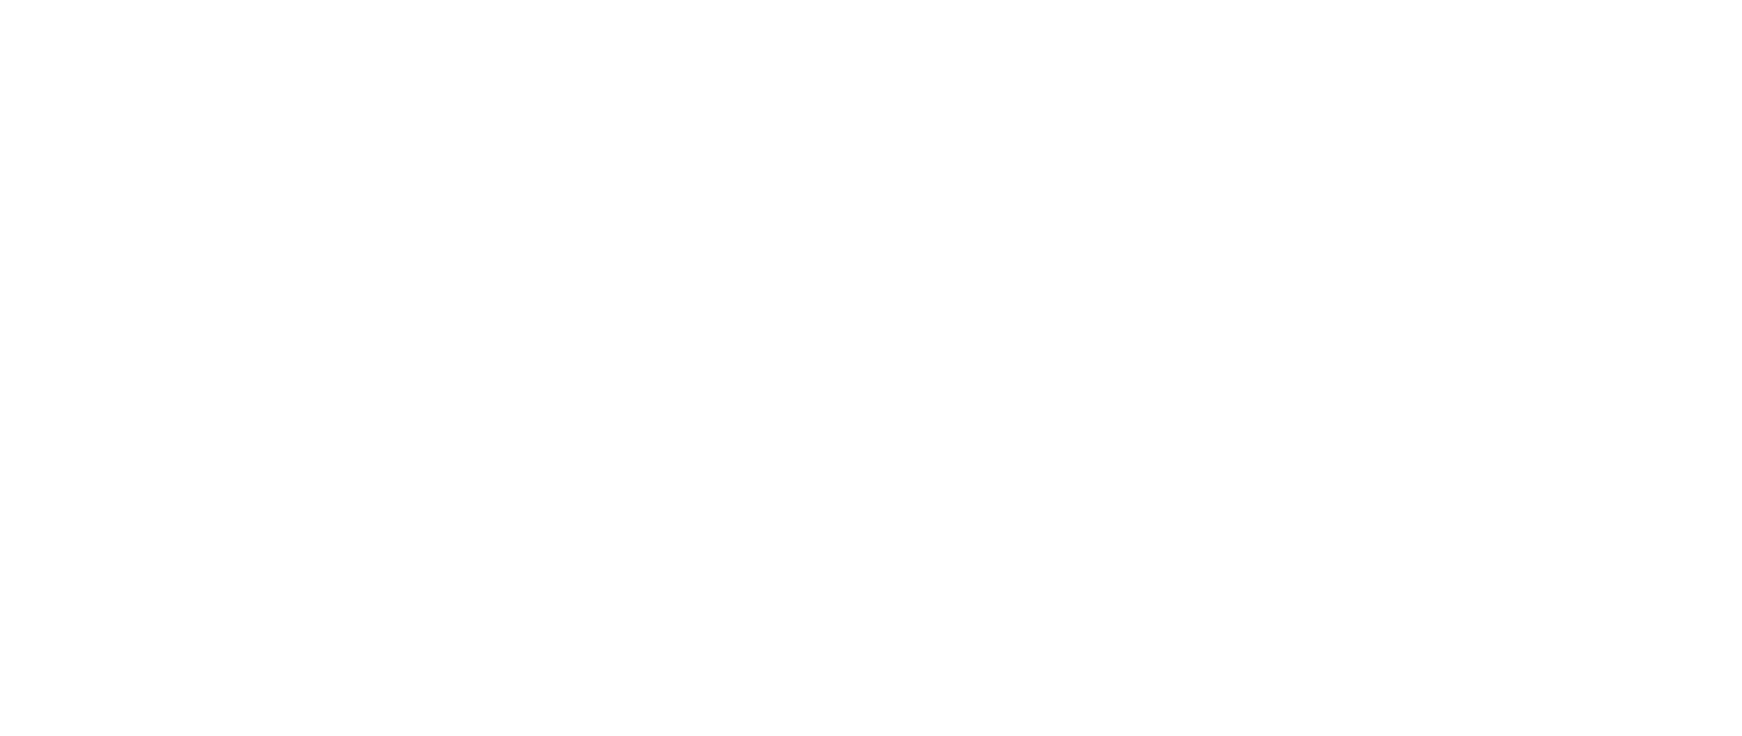 Kyle Wolff Real Estate